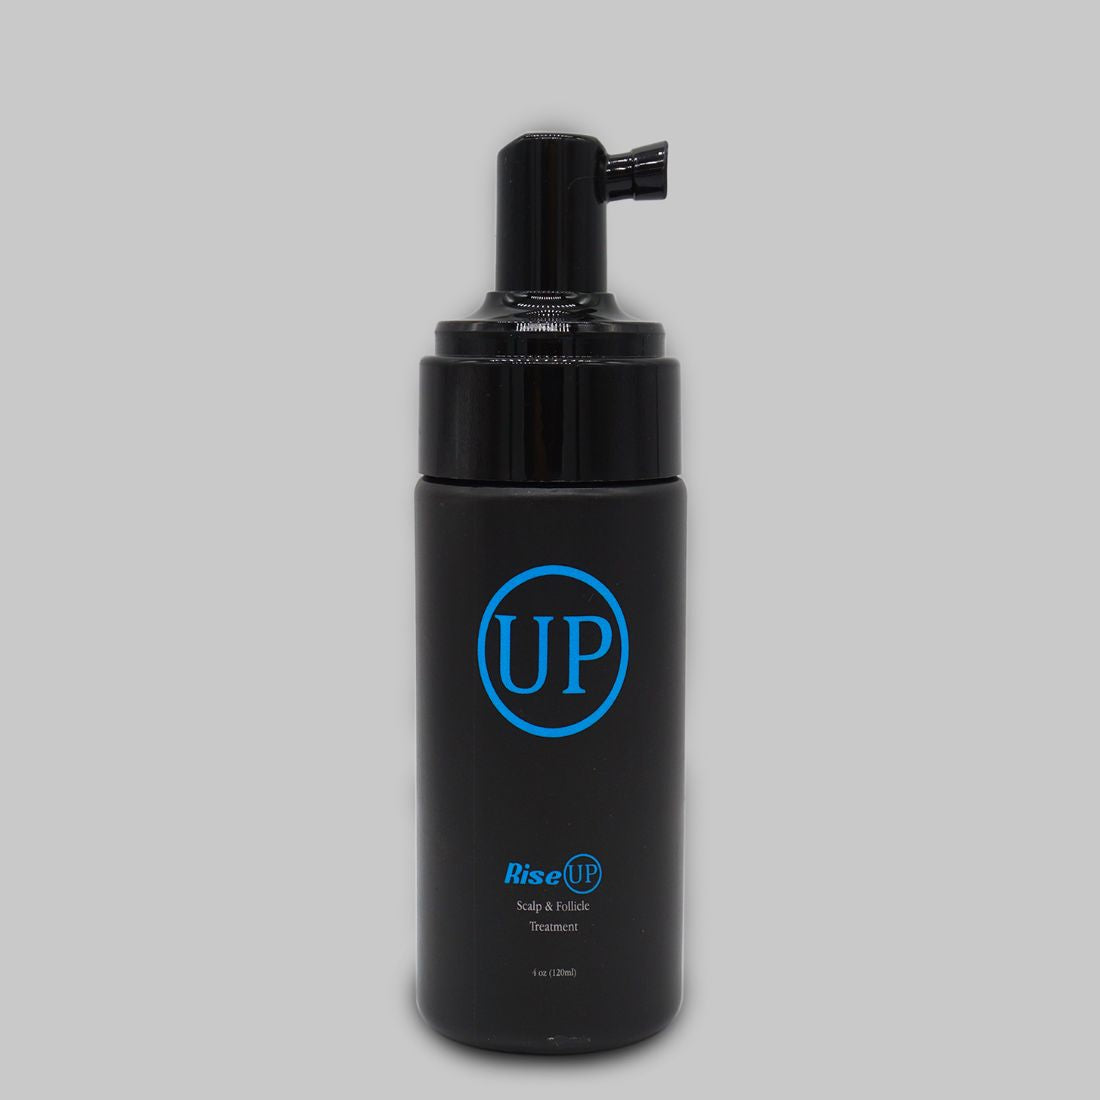 3 Piece Hair Growth System (32oz) w/ FREE Hold UP